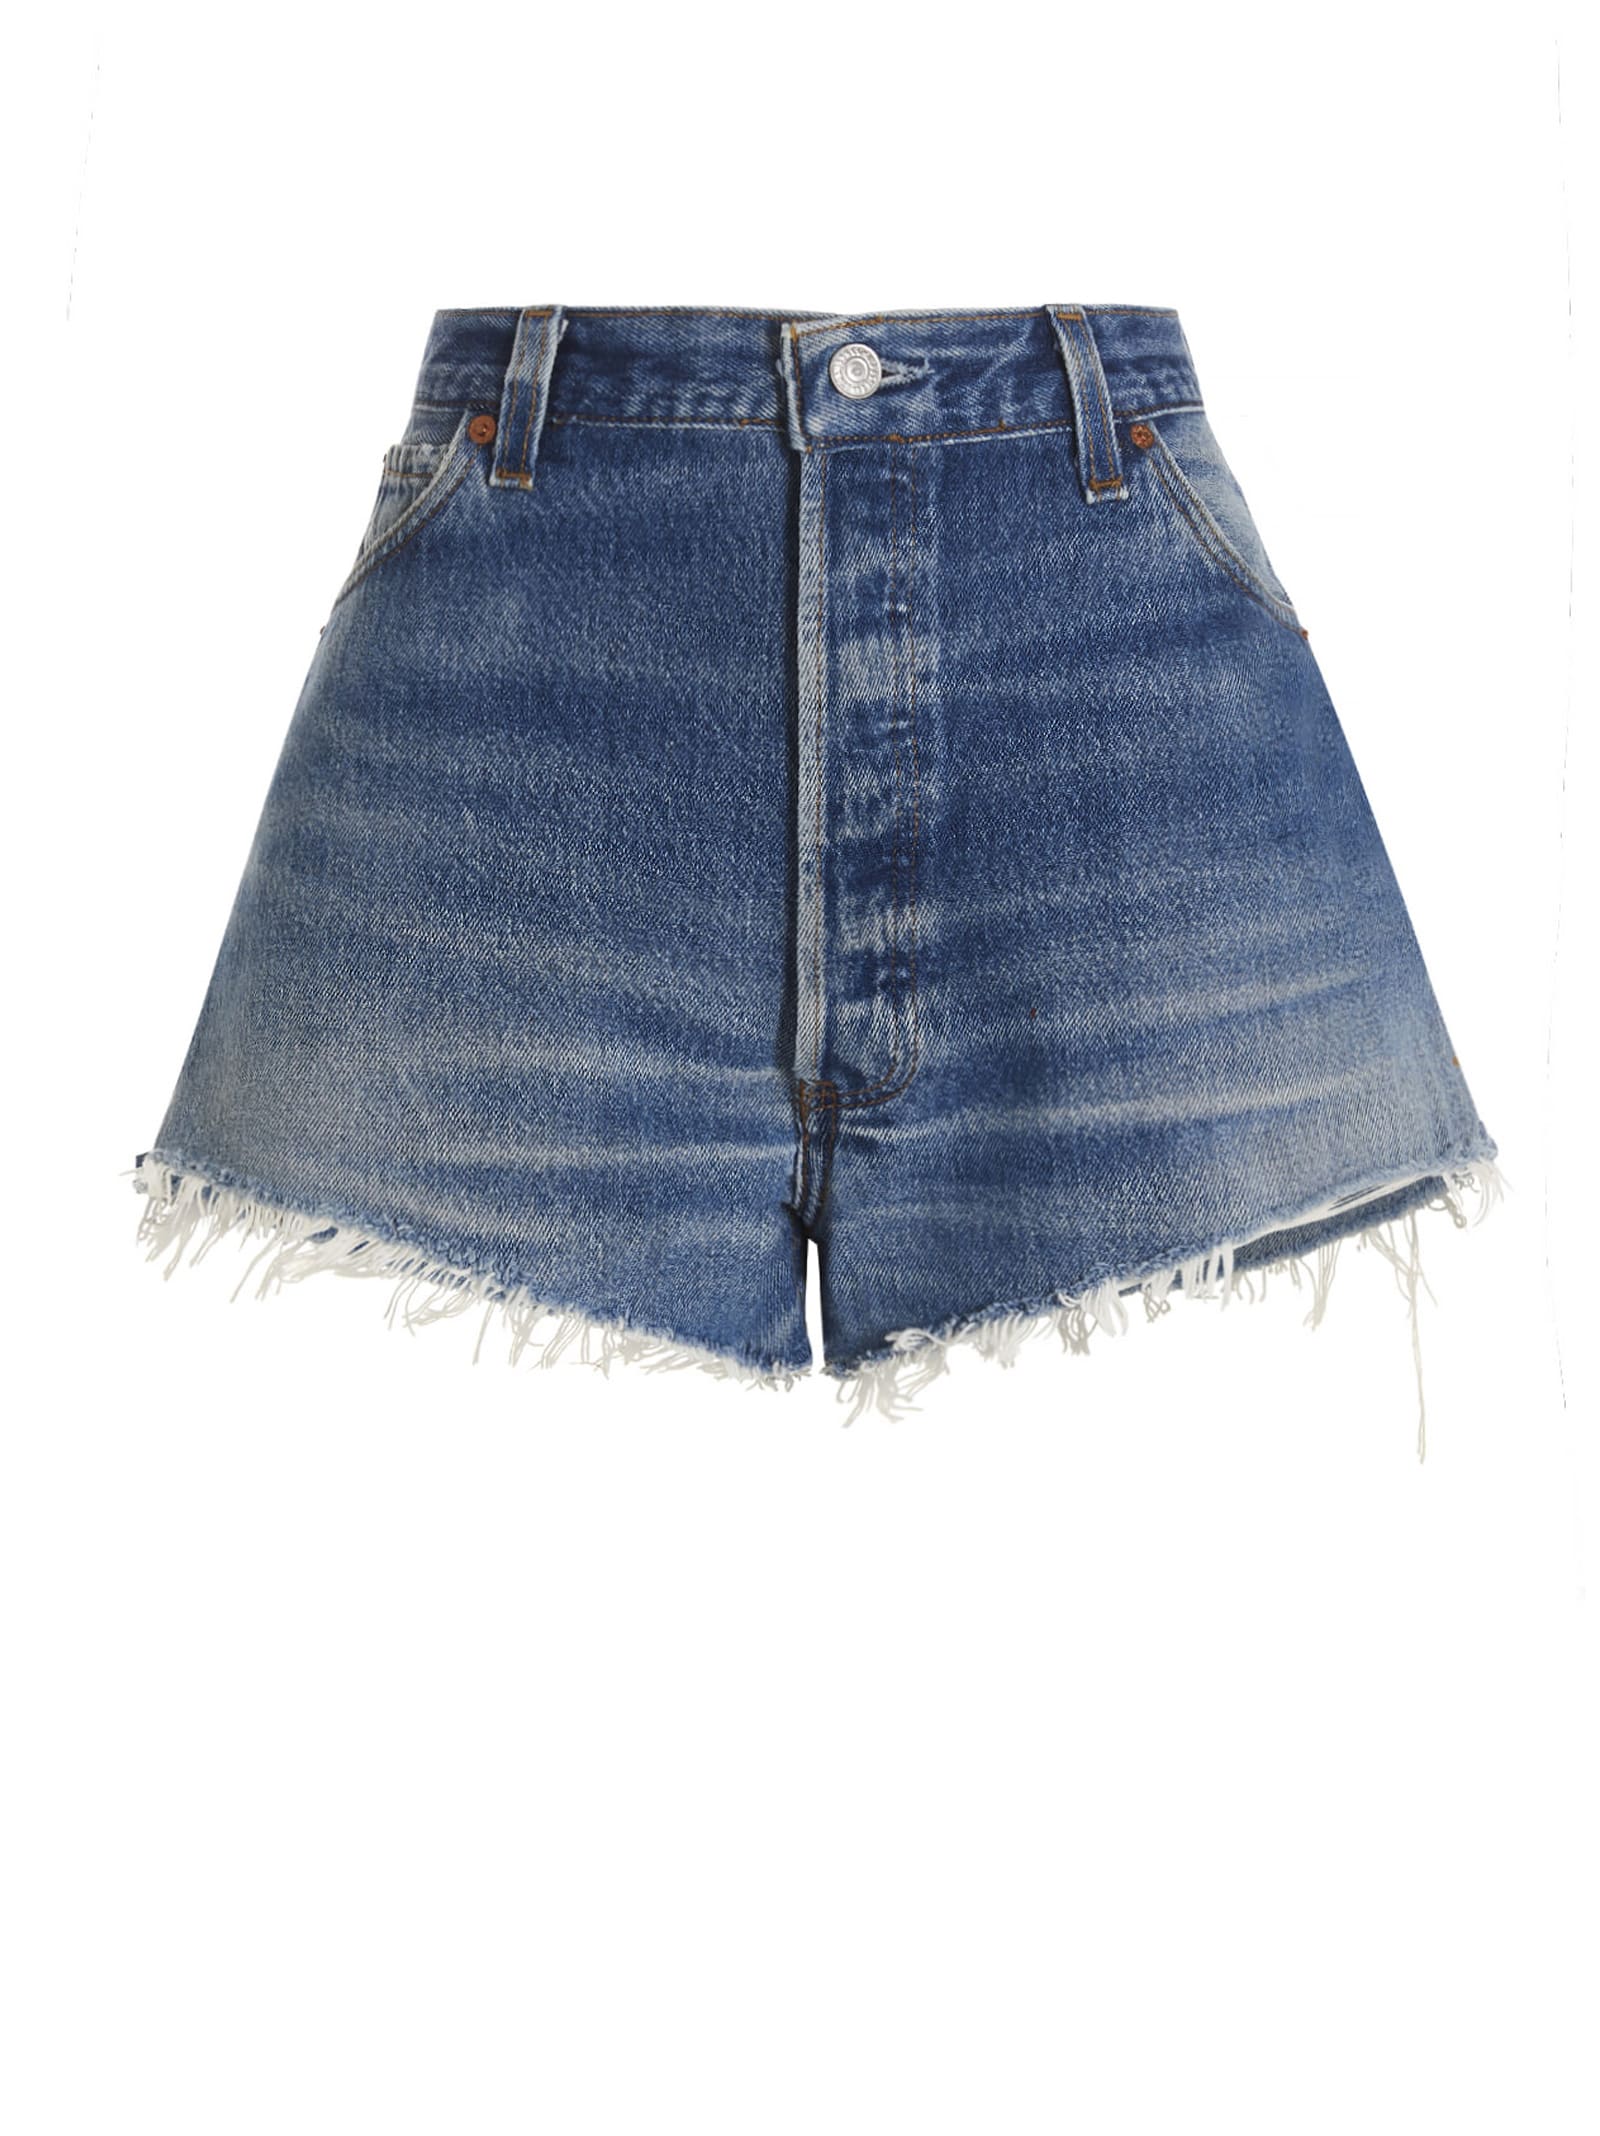 RE/DONE Levis Collab. Shorts